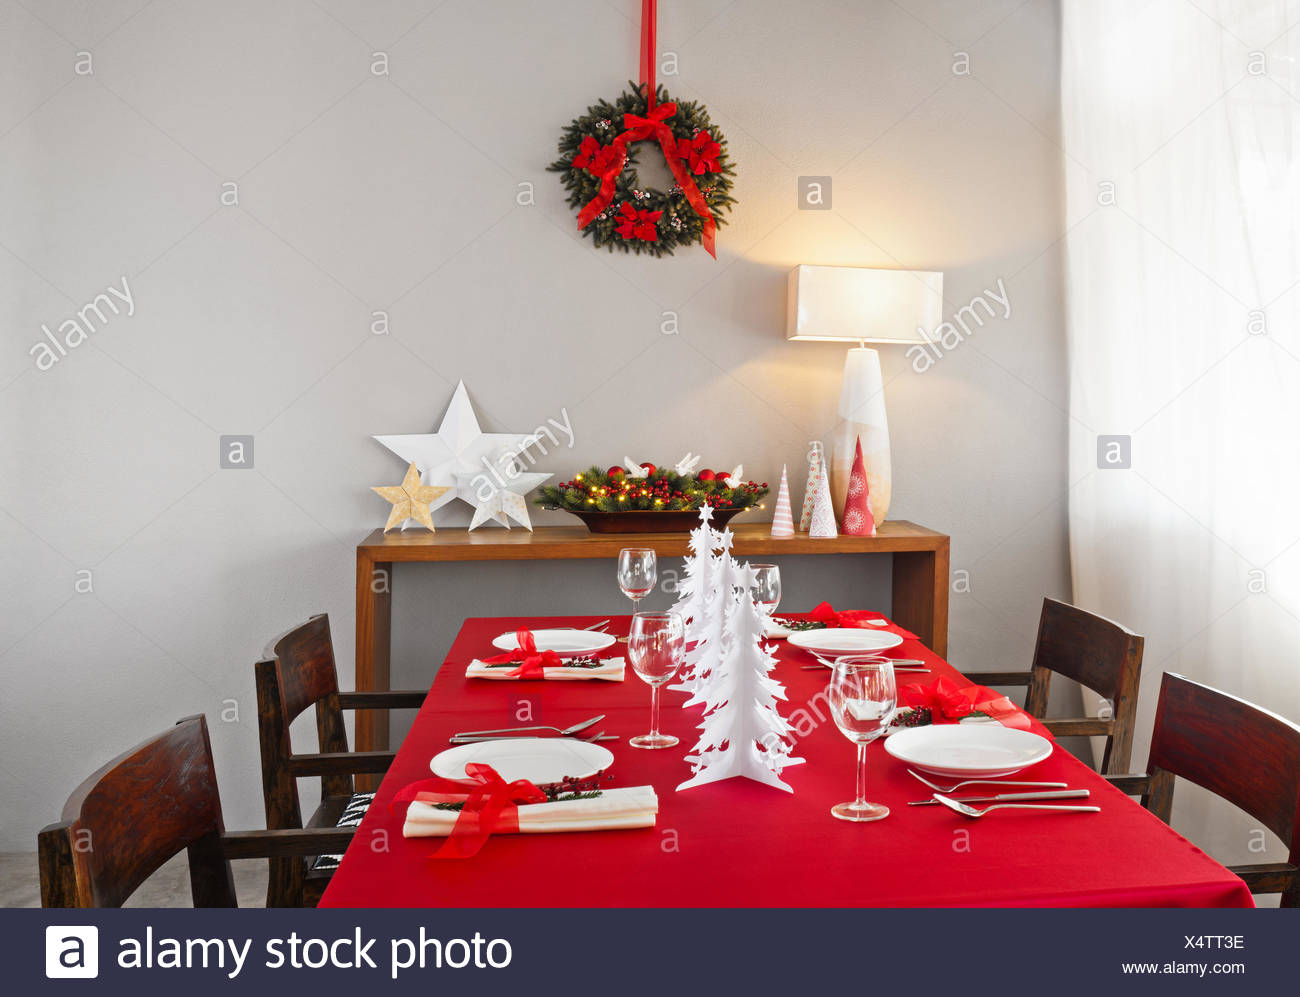 Christmas Dinner Table Setup With Decoration On The Side Board Stock Photo Alamy